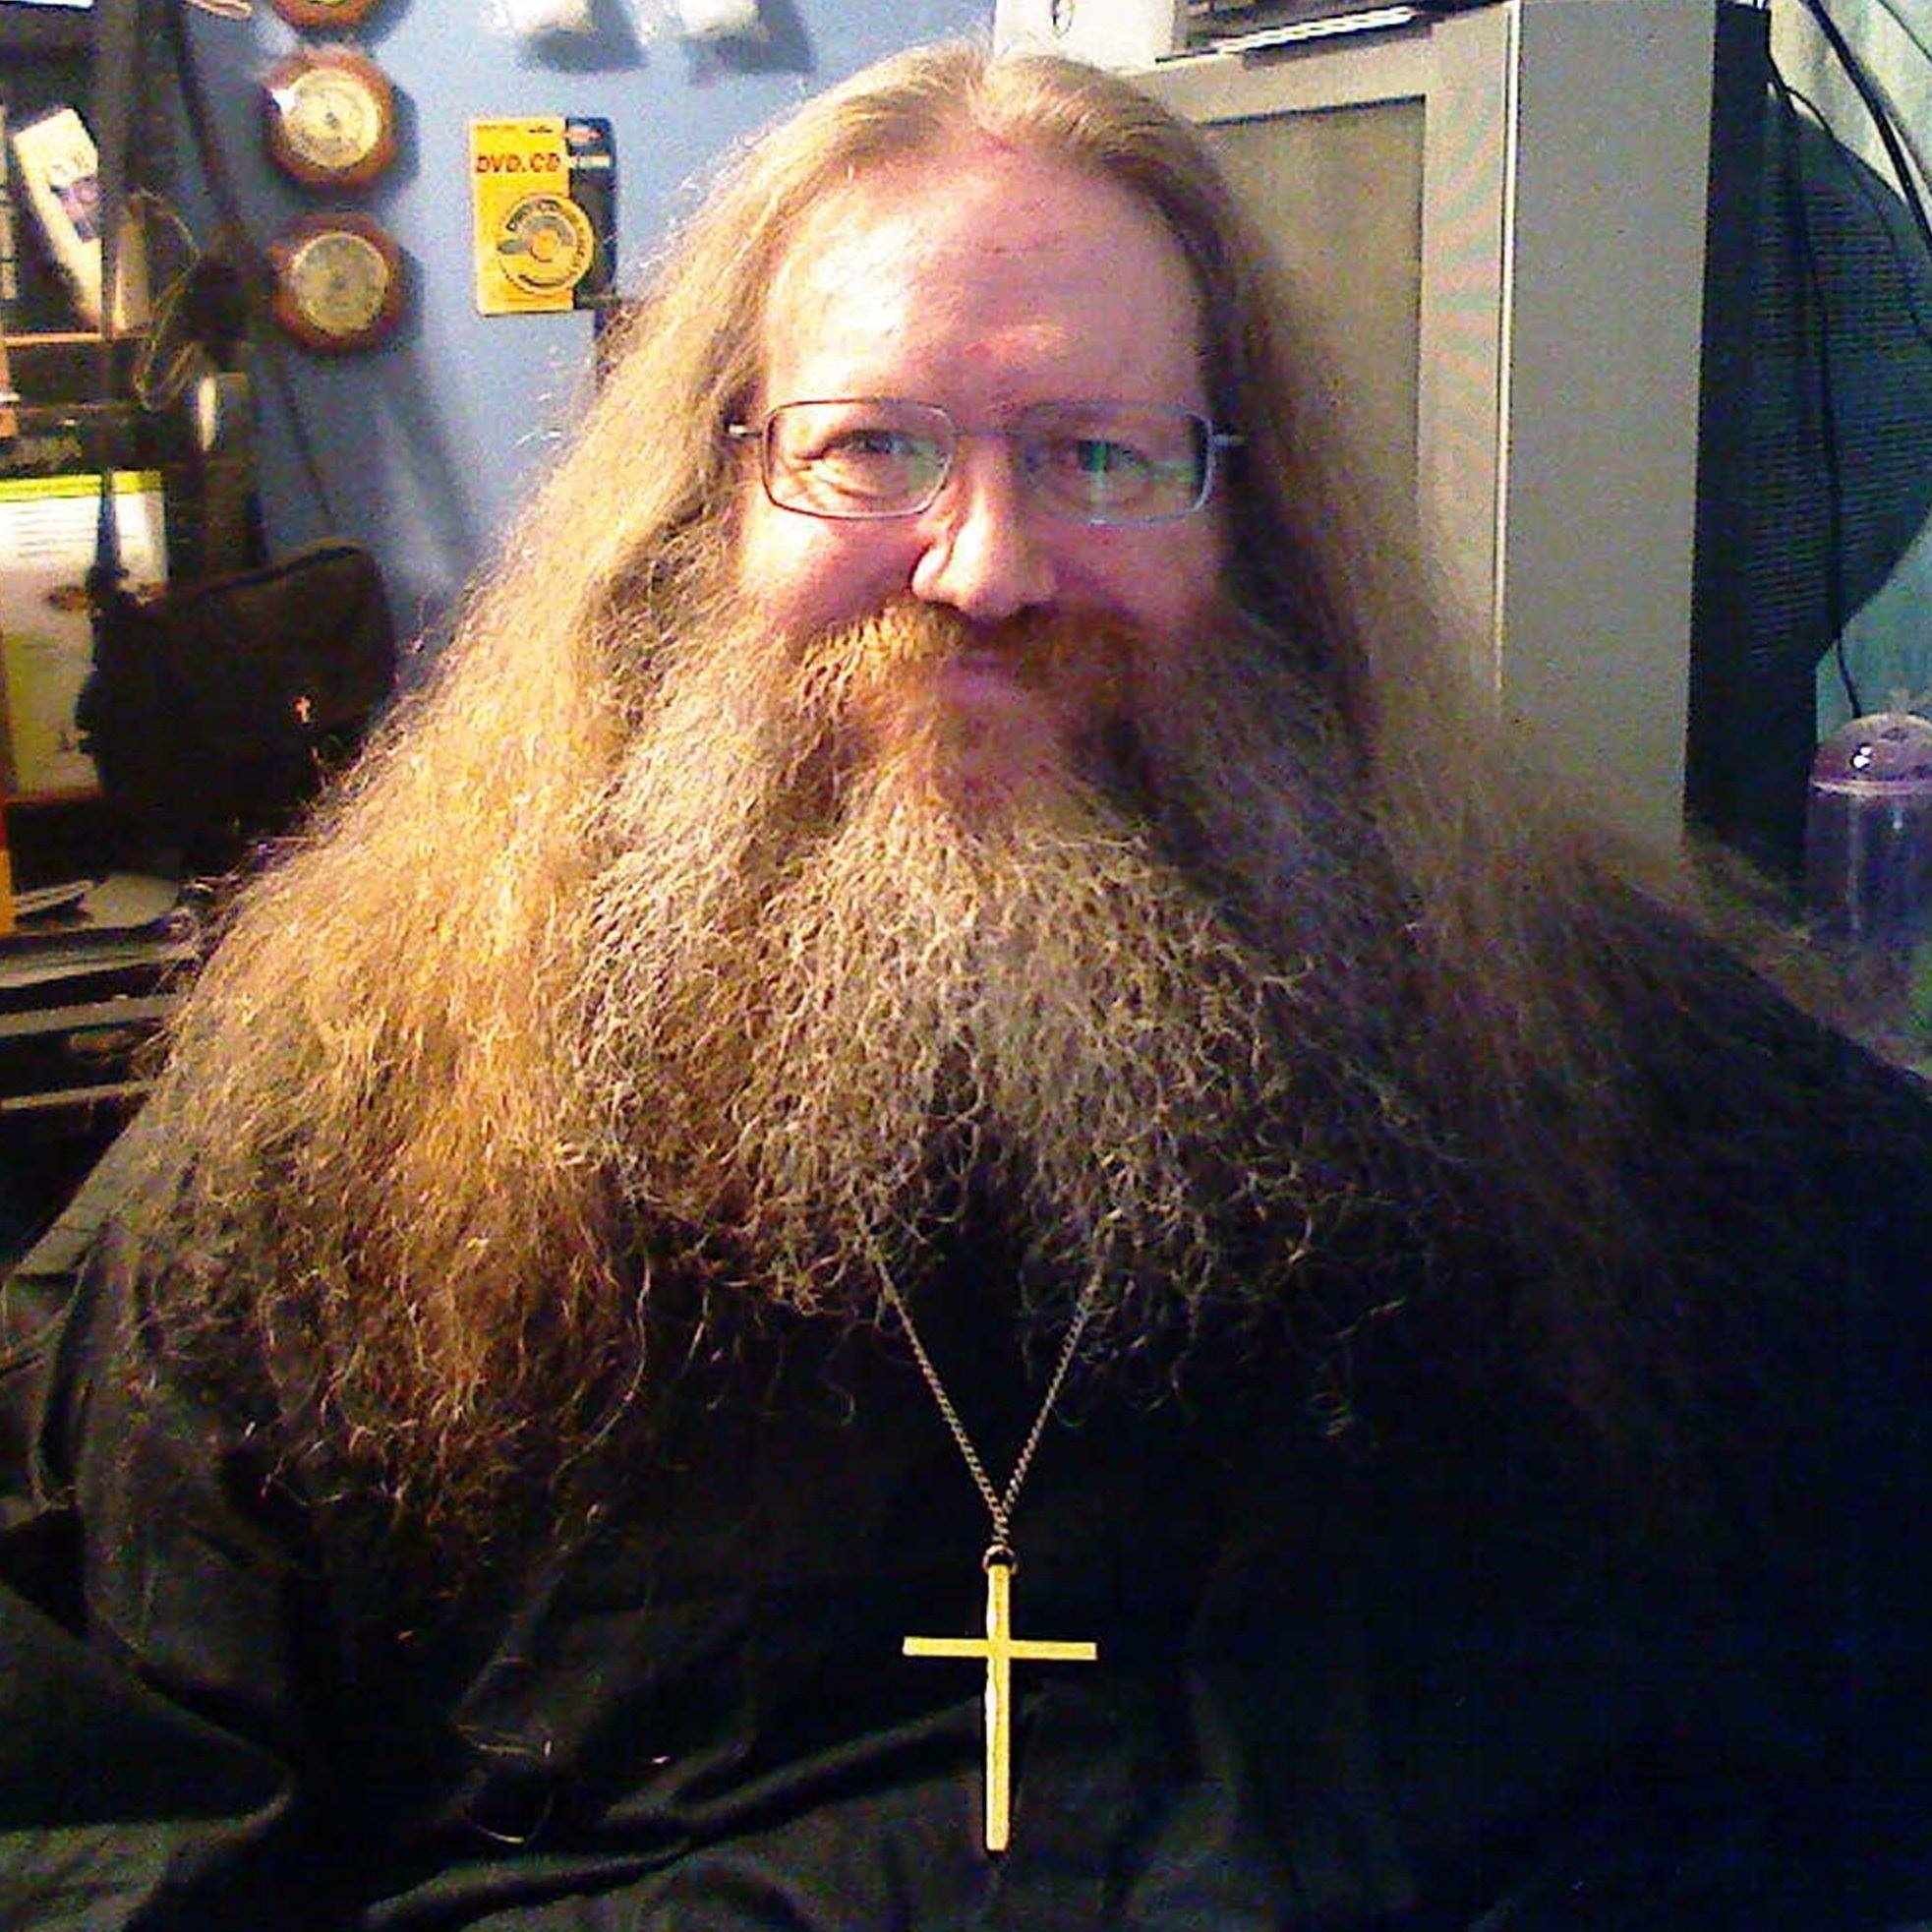 Click here to see more pictures of Reverend Fuzzy